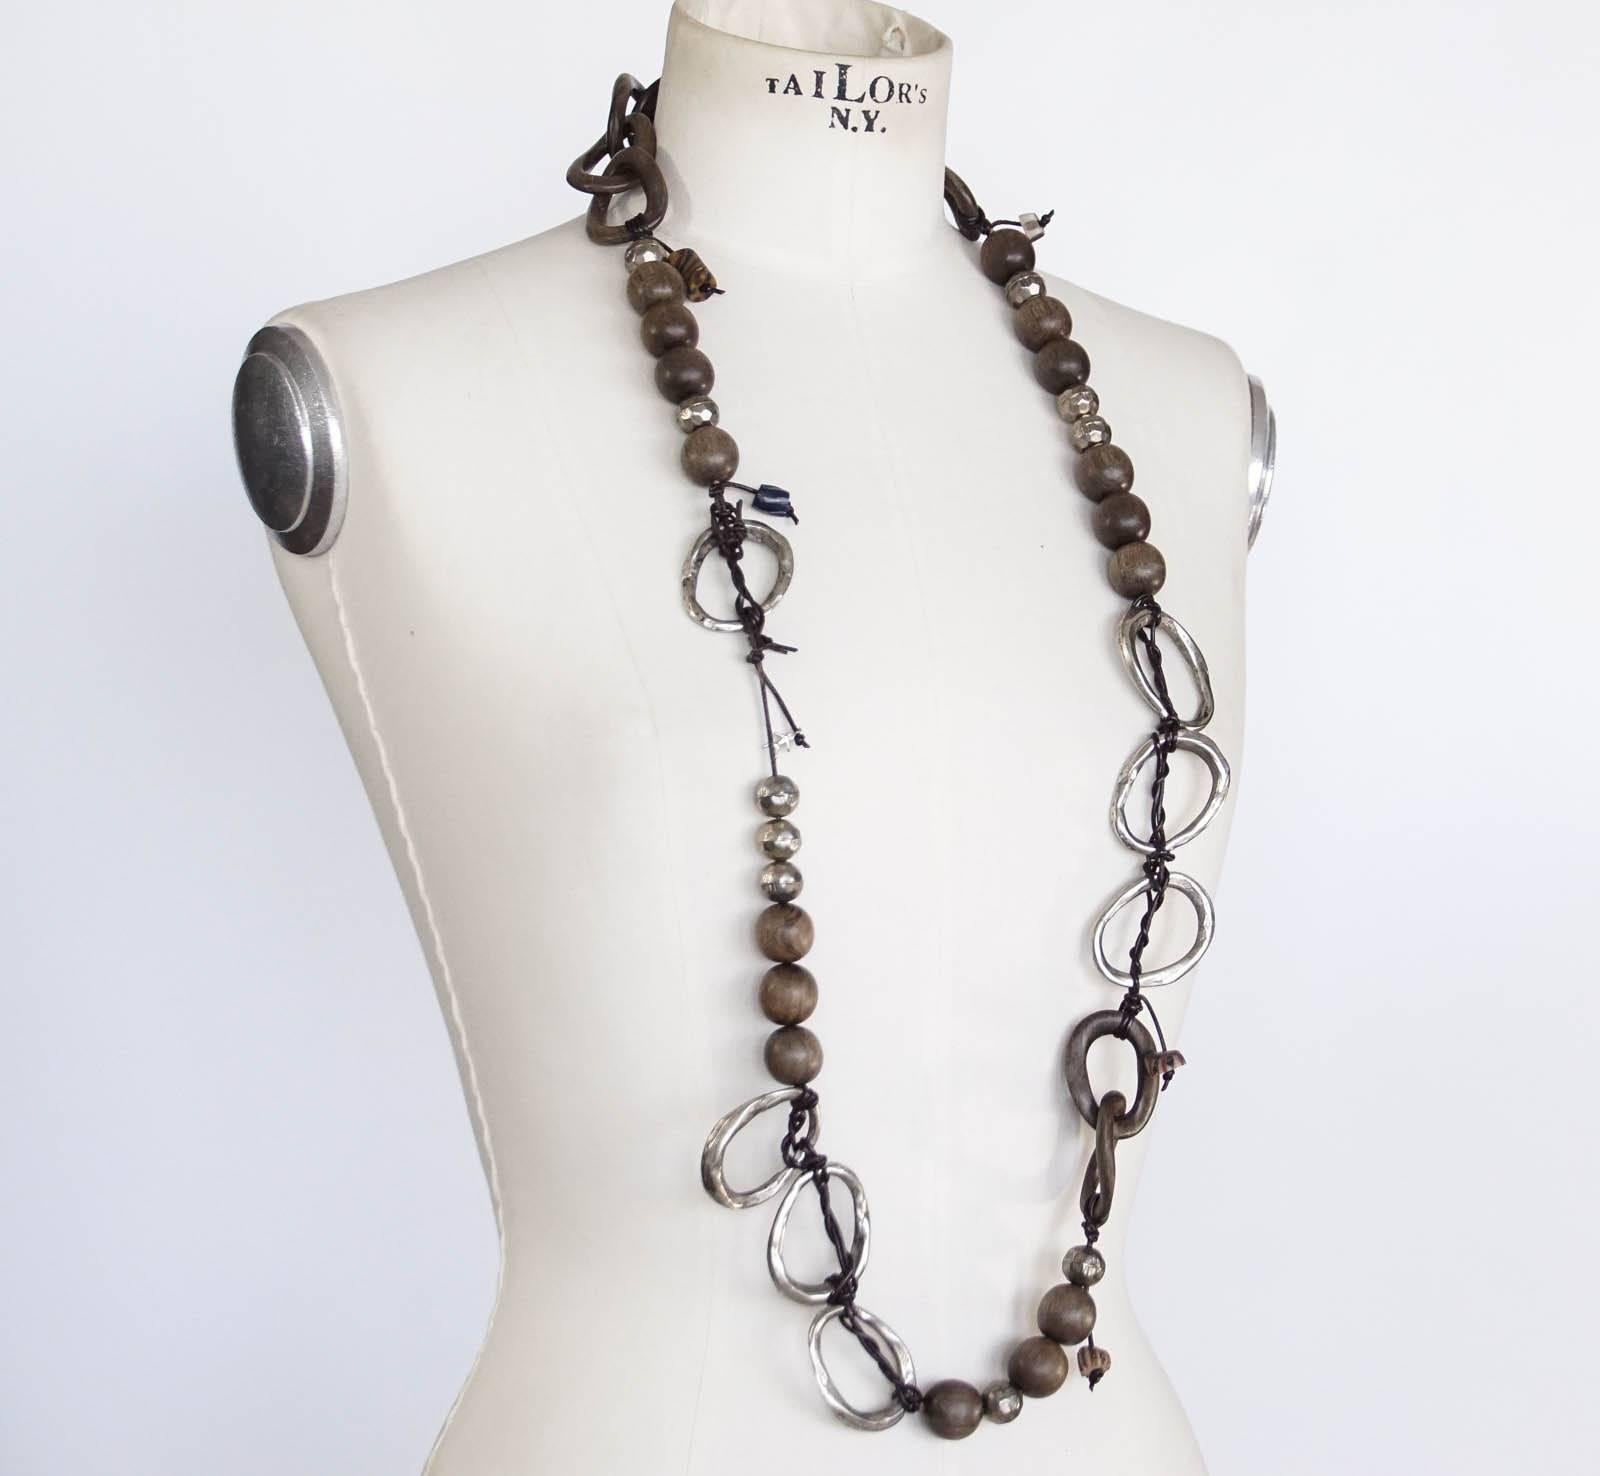 Guaranteed authentic Henry Beguelin striking bold warm brown wood and distressed metal necklace invarying shapes.
Accentuated with thin leather 'rope'. Some charms that make you think of Murano.
Signature logo on necklace.
final sale

NECKLACE